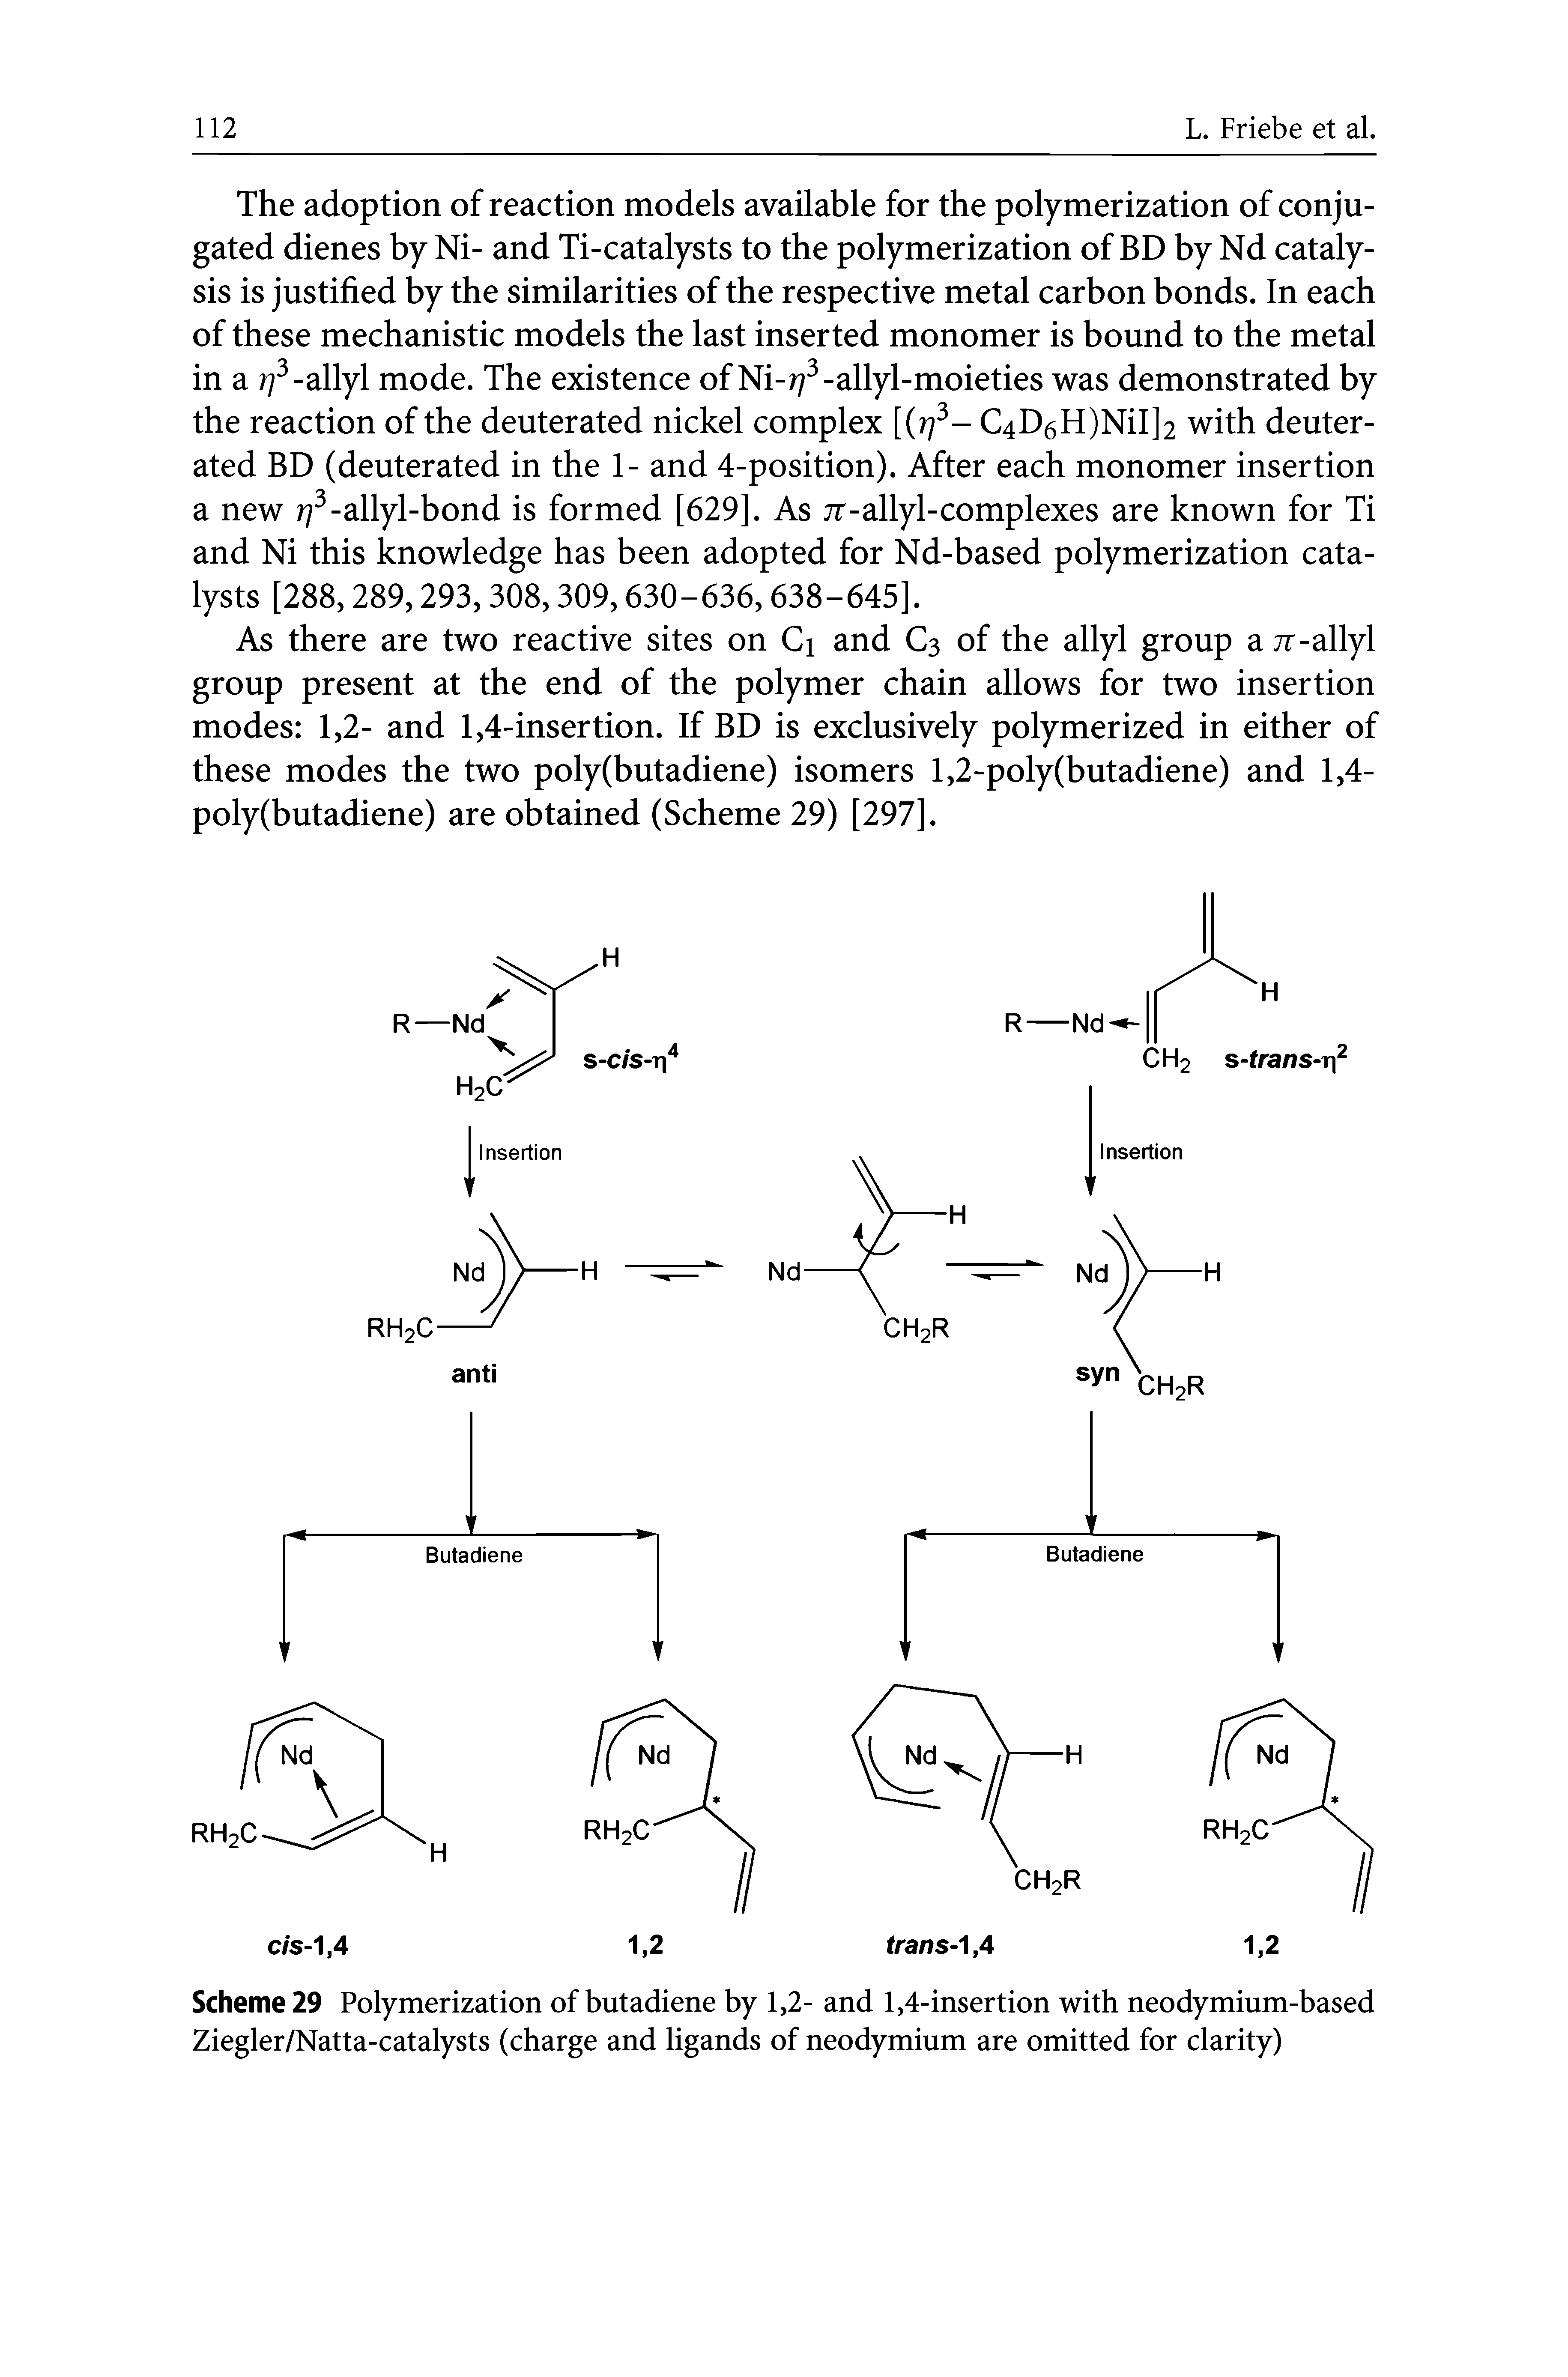 Scheme 29 Polymerization of butadiene by 1,2- and 1,4-insertion with neodymium-based Ziegler/Natta-catalysts (charge and ligands of neodymium are omitted for clarity)...